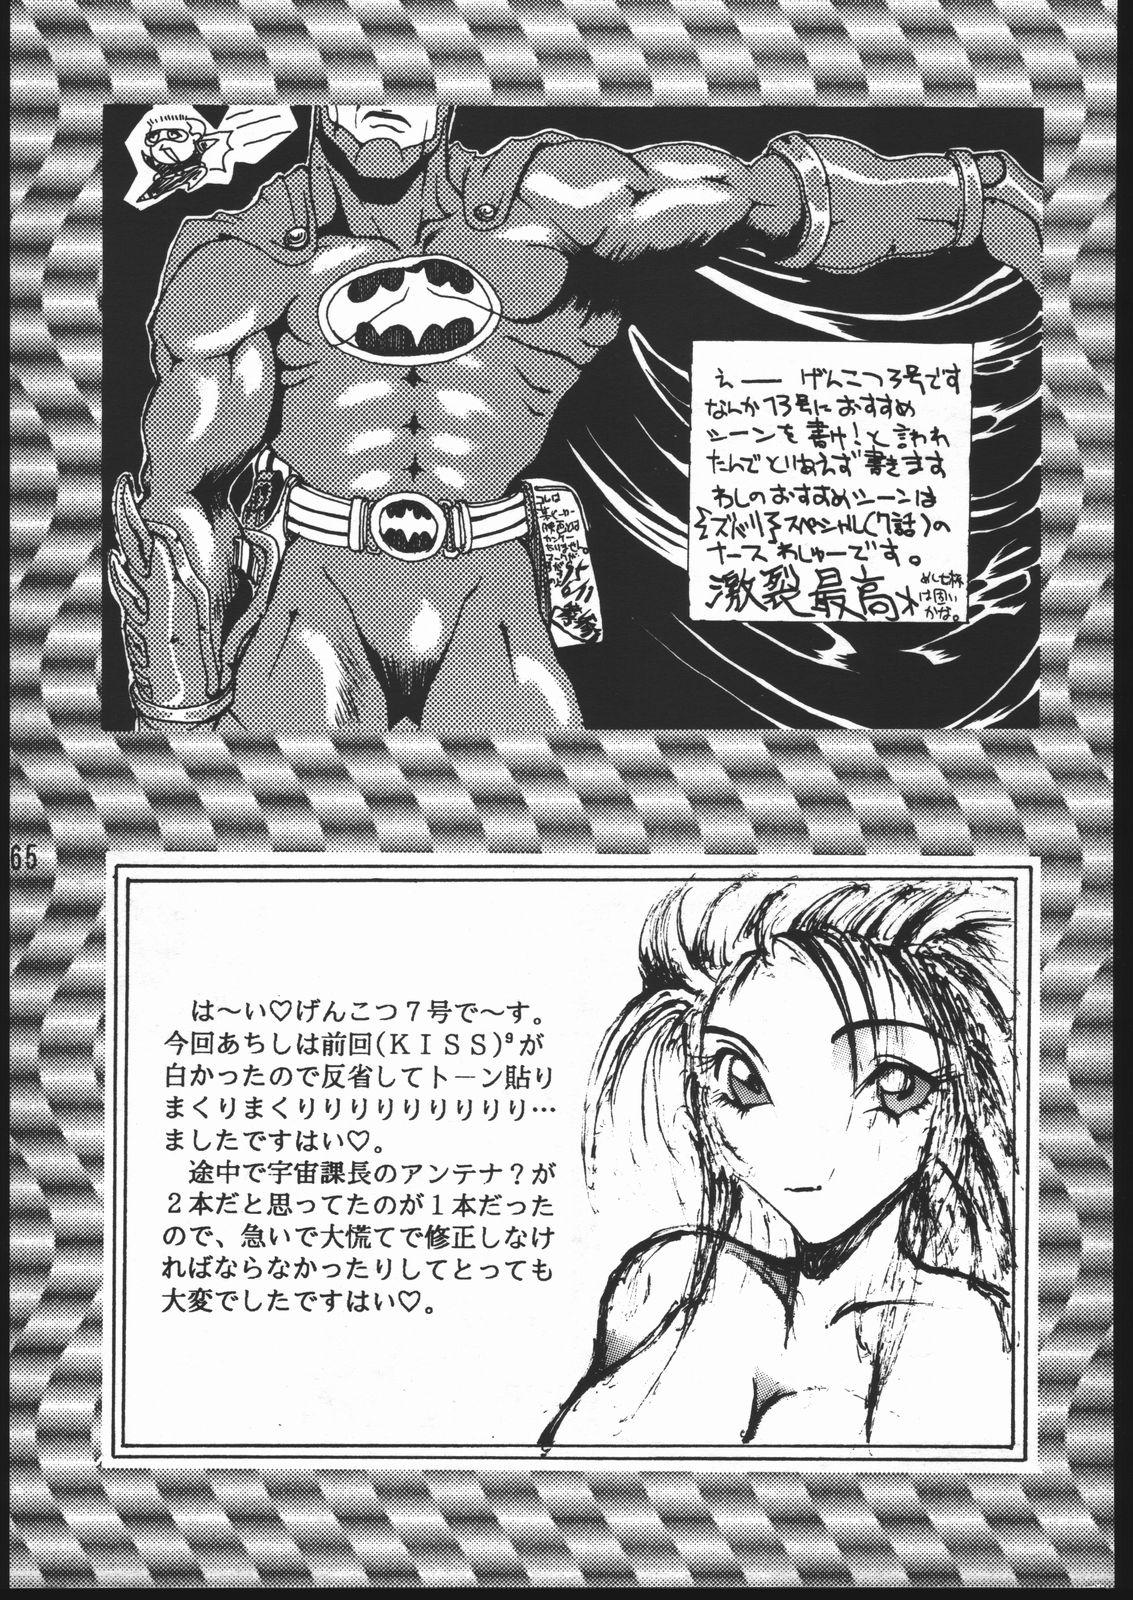 Femboy CD SONG BOOK - Tenchi muyo Red Head - Page 64